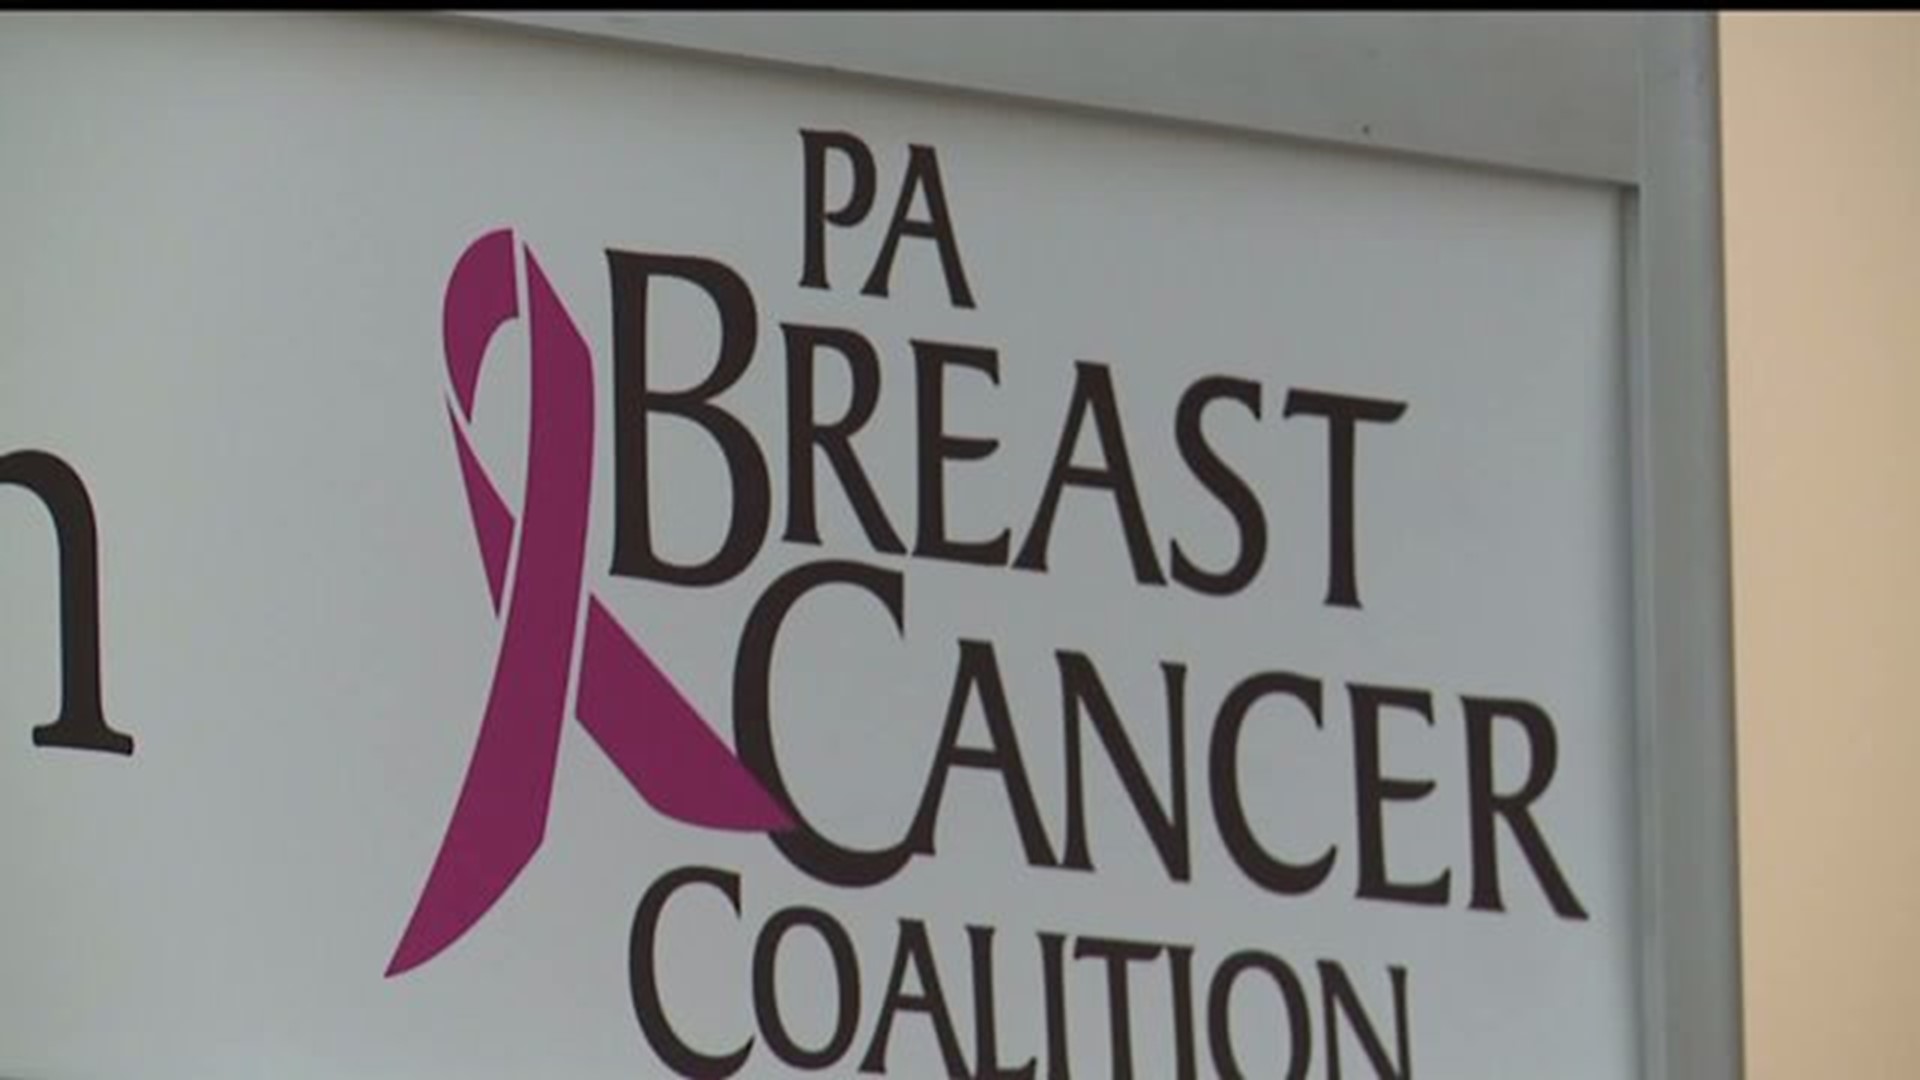 PA Breast Cancer Coalition results for 3D Mammograms